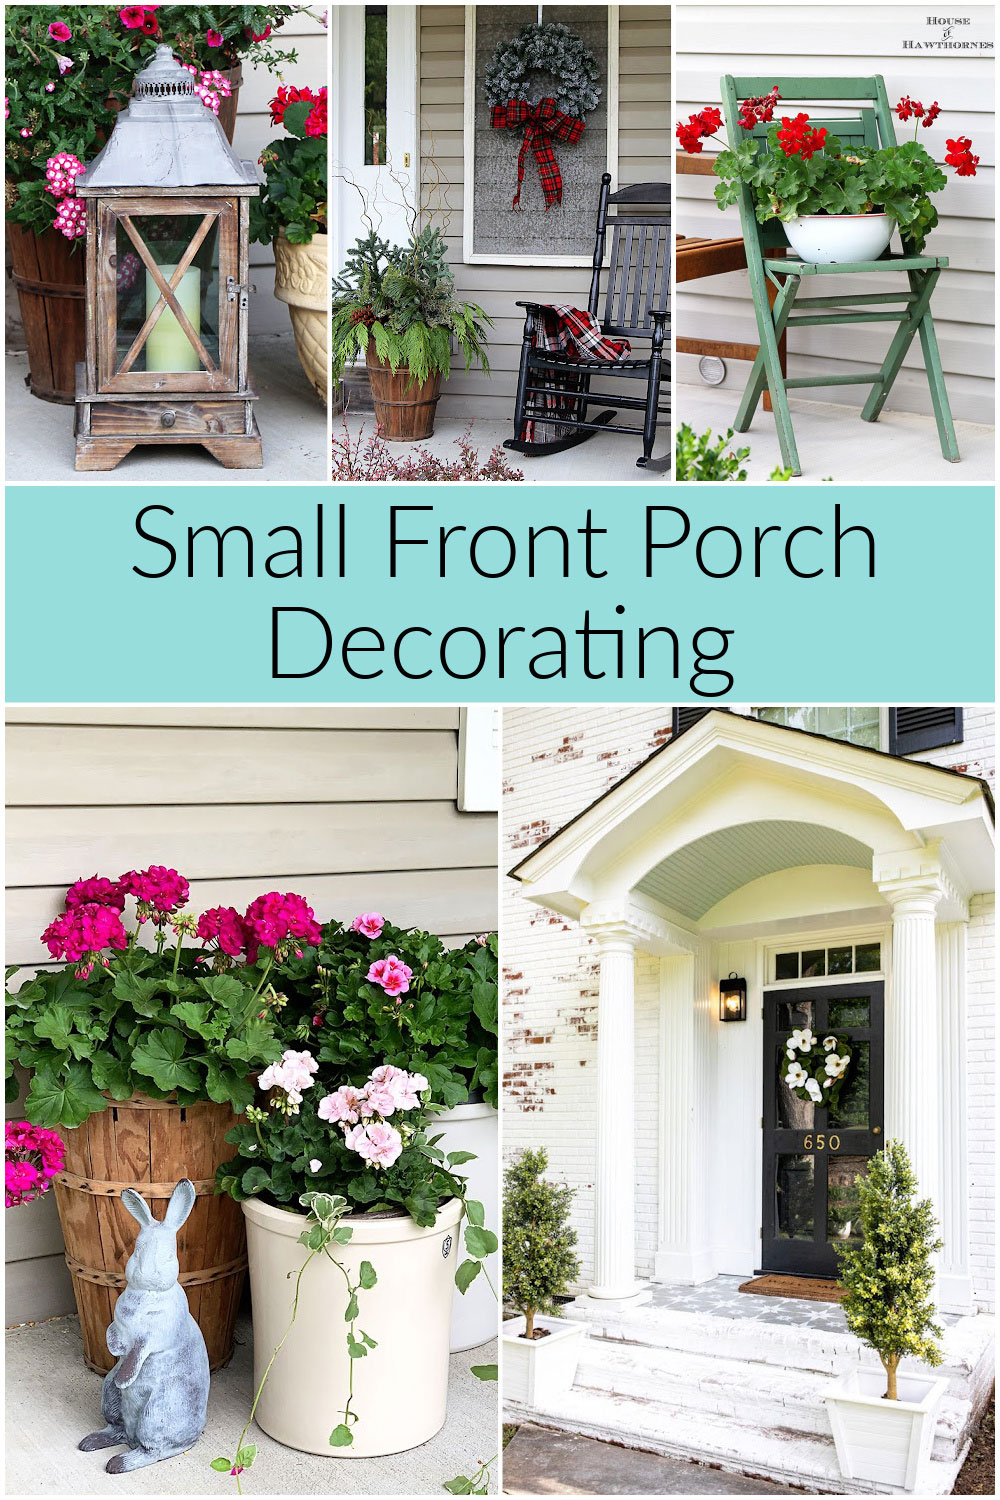 Best ideas for decorating small front porches.